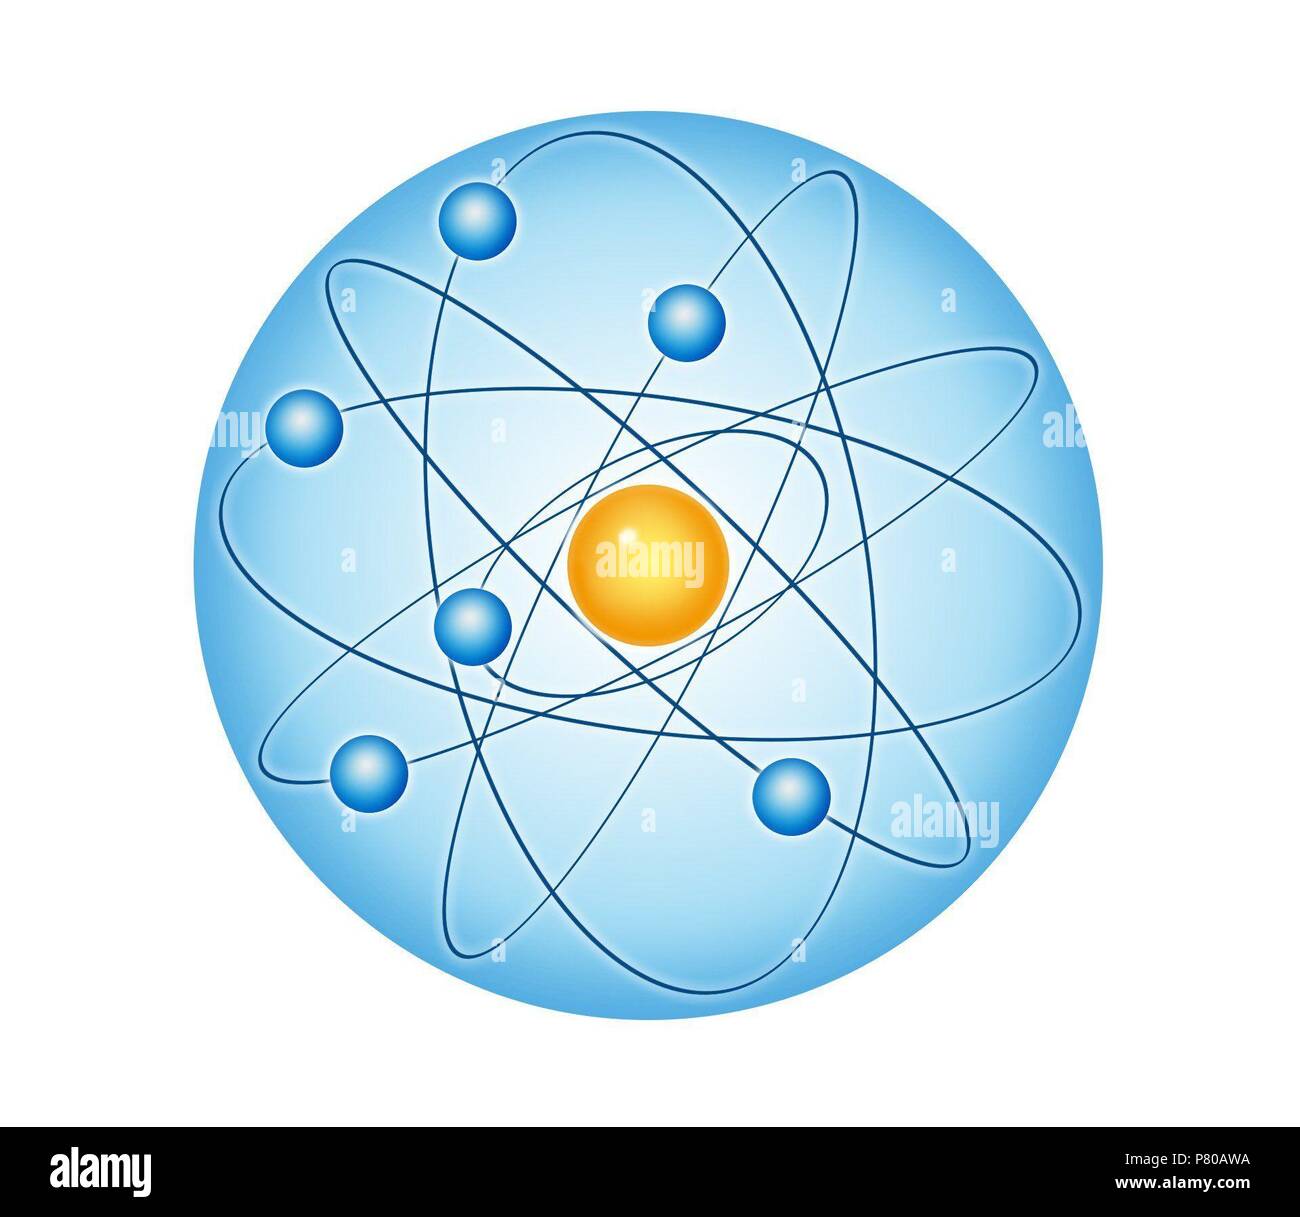 Atom. Atomic model of Rutherford Stock Photo - Alamy